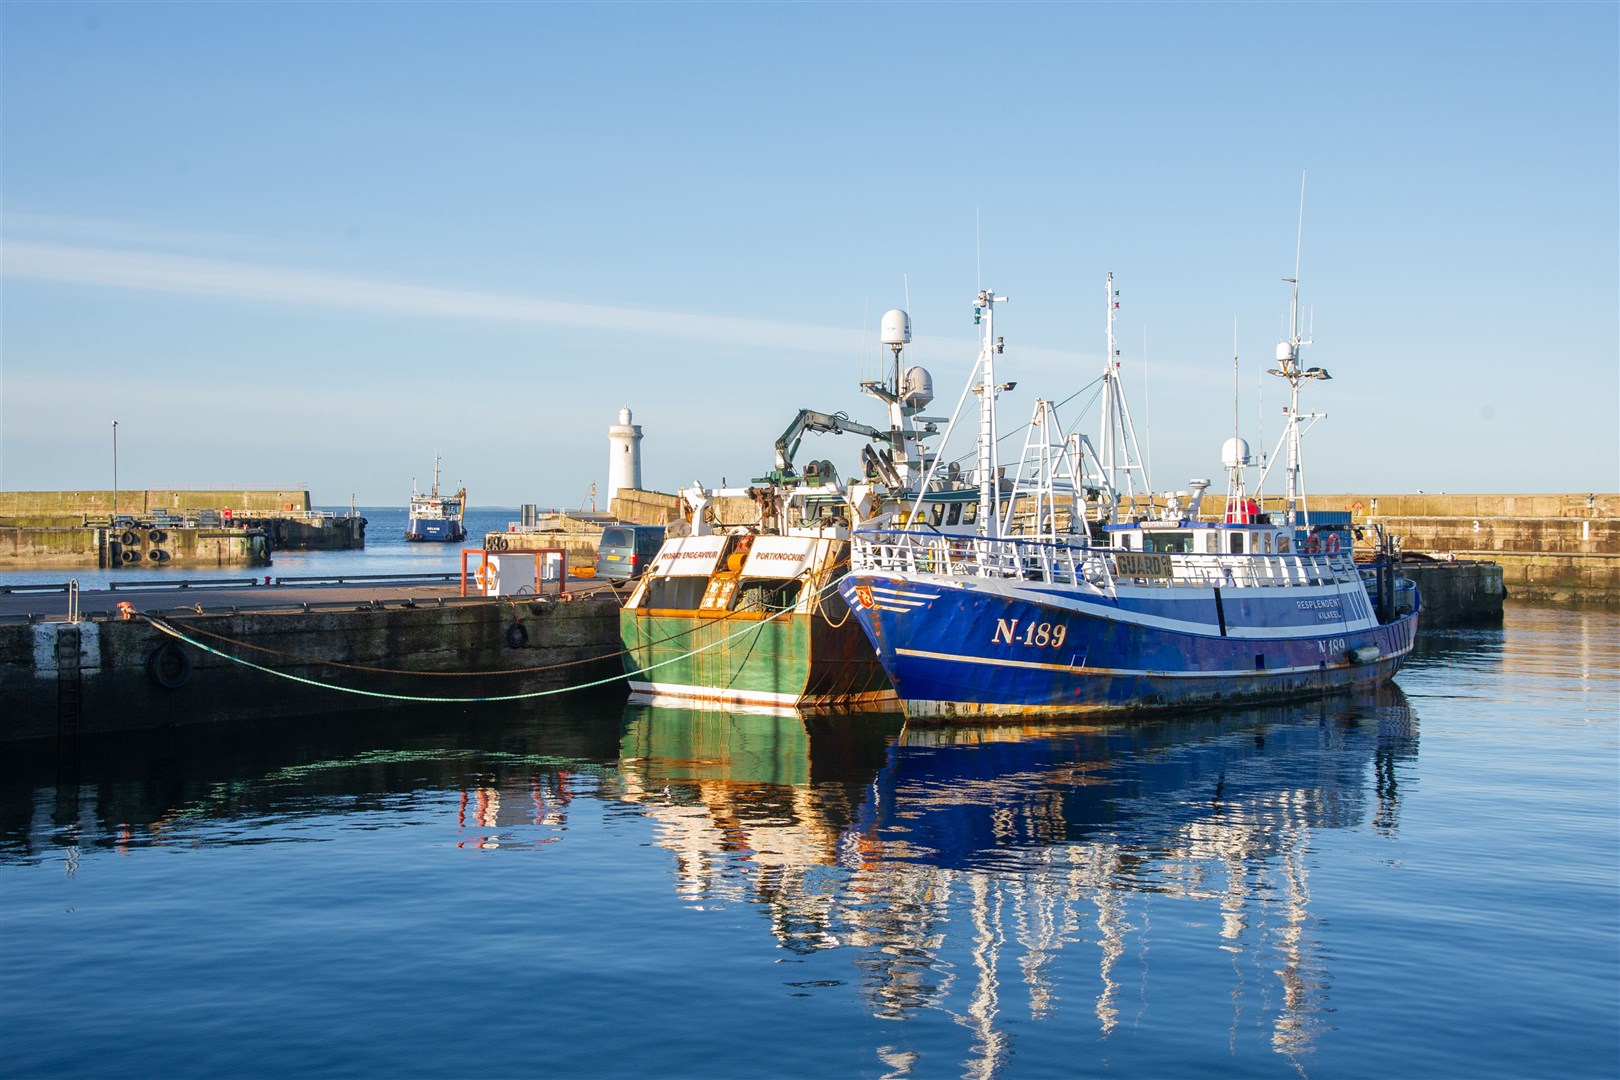 Fish landings last year at Buckie Harbour were hit hard by Covid.